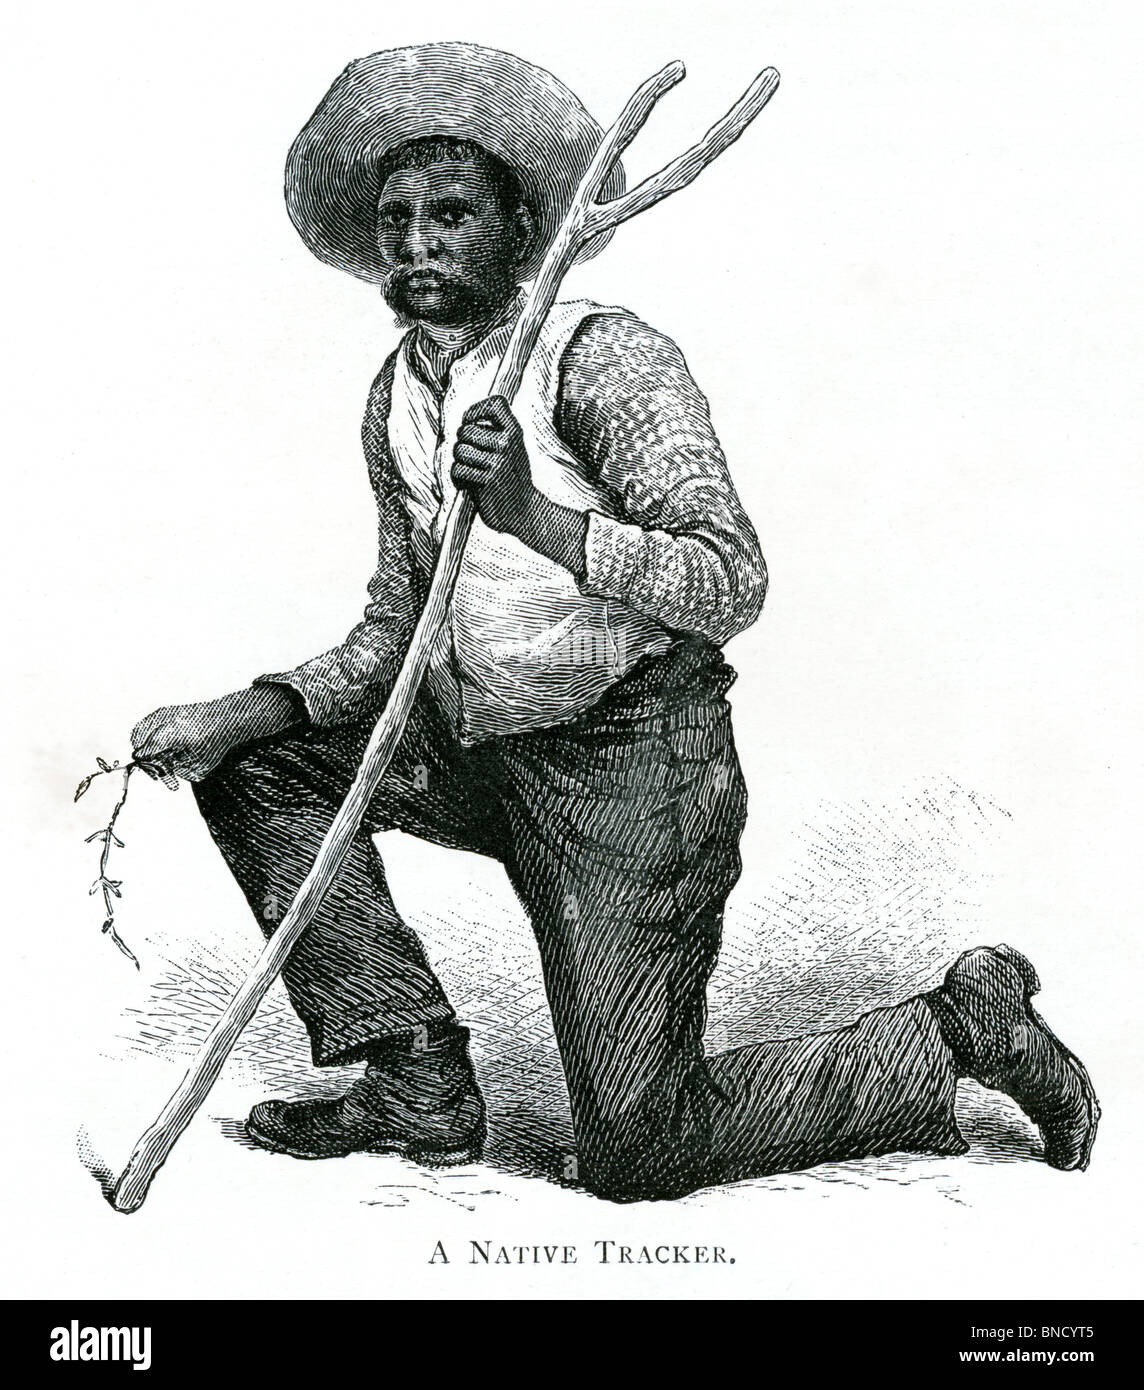 An engraving of a Native Tracker - published in a book about Australia printed in 1886. Stock Photo